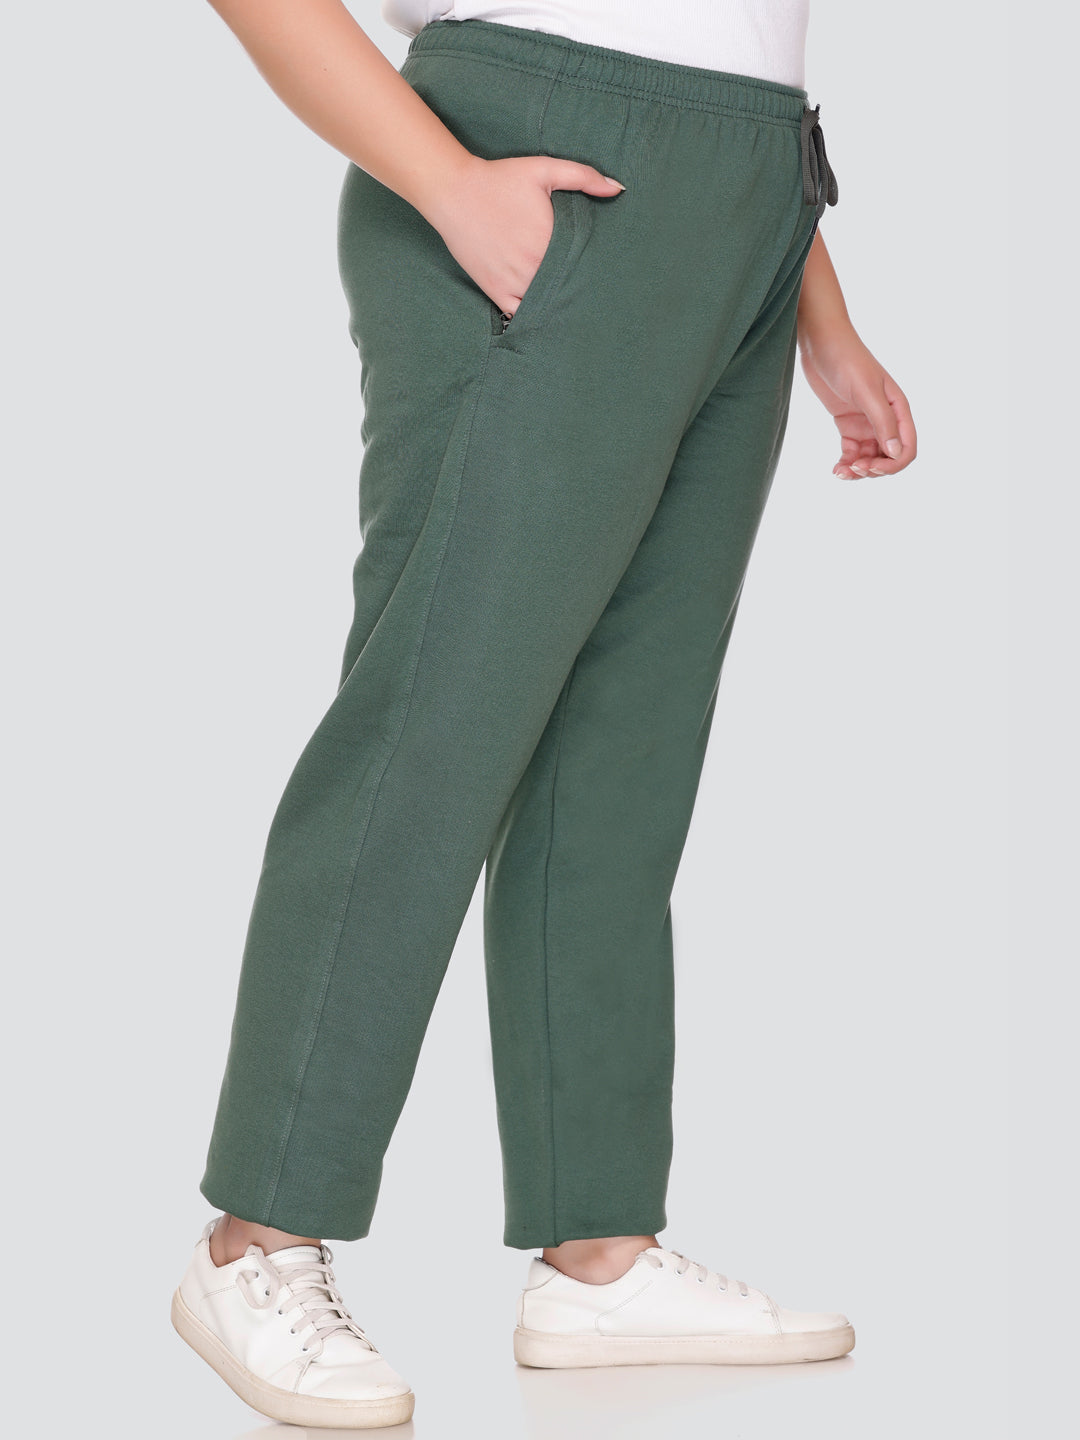 Double Breasted Fold Pleated Tailored Trousers | Women Pants Casual Classy  | Trousers for girls, Formal trousers women, Formal pants women